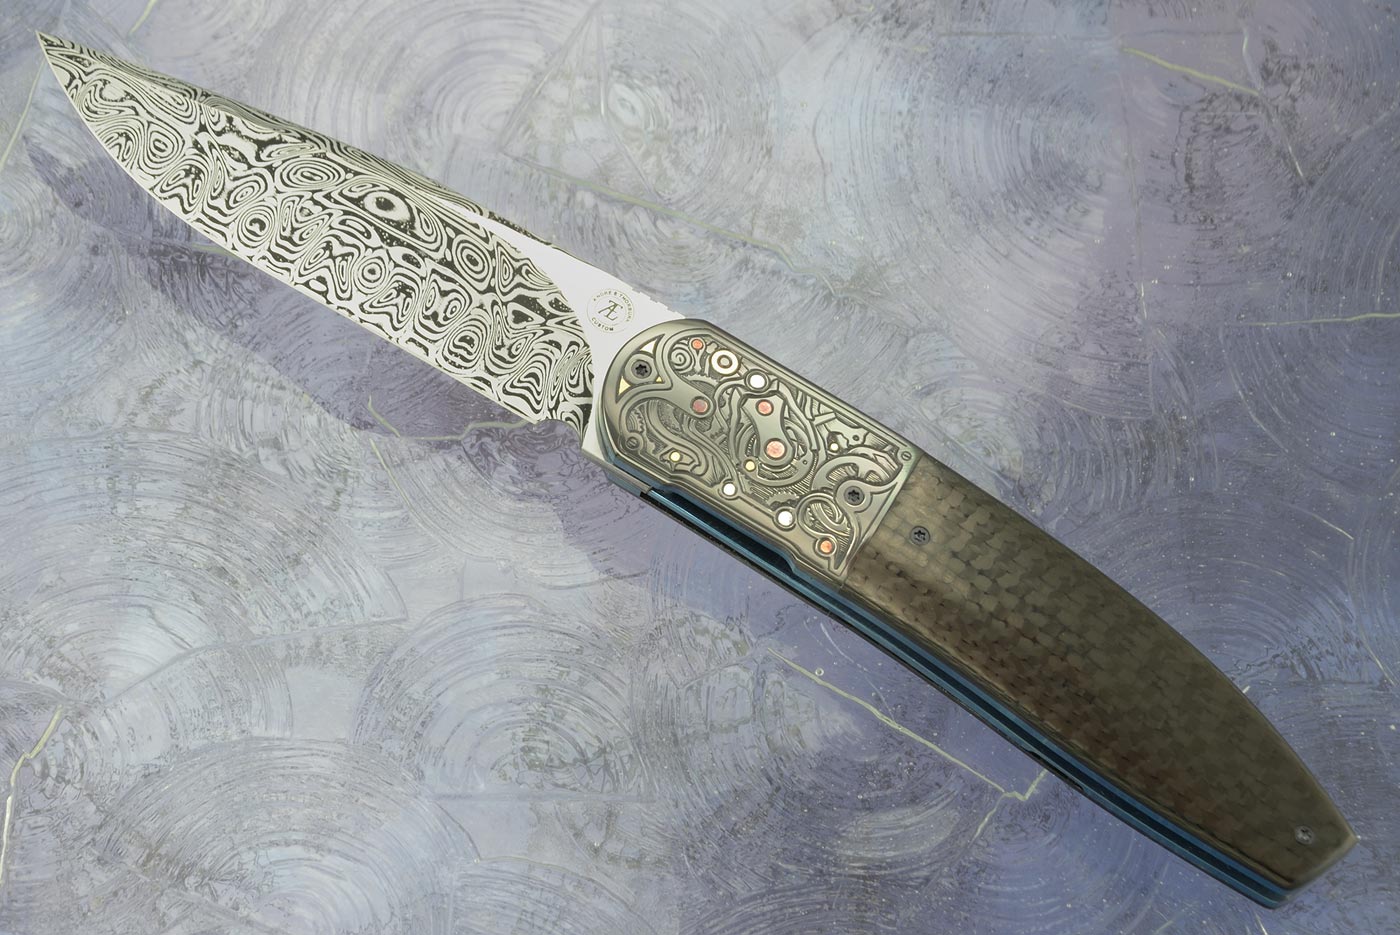 L28 Front Flipper with Damascus, Carbon Fiber, and Engraved Zirconium with Gold and Red Bronze Inlay (Ceramic IKBS)